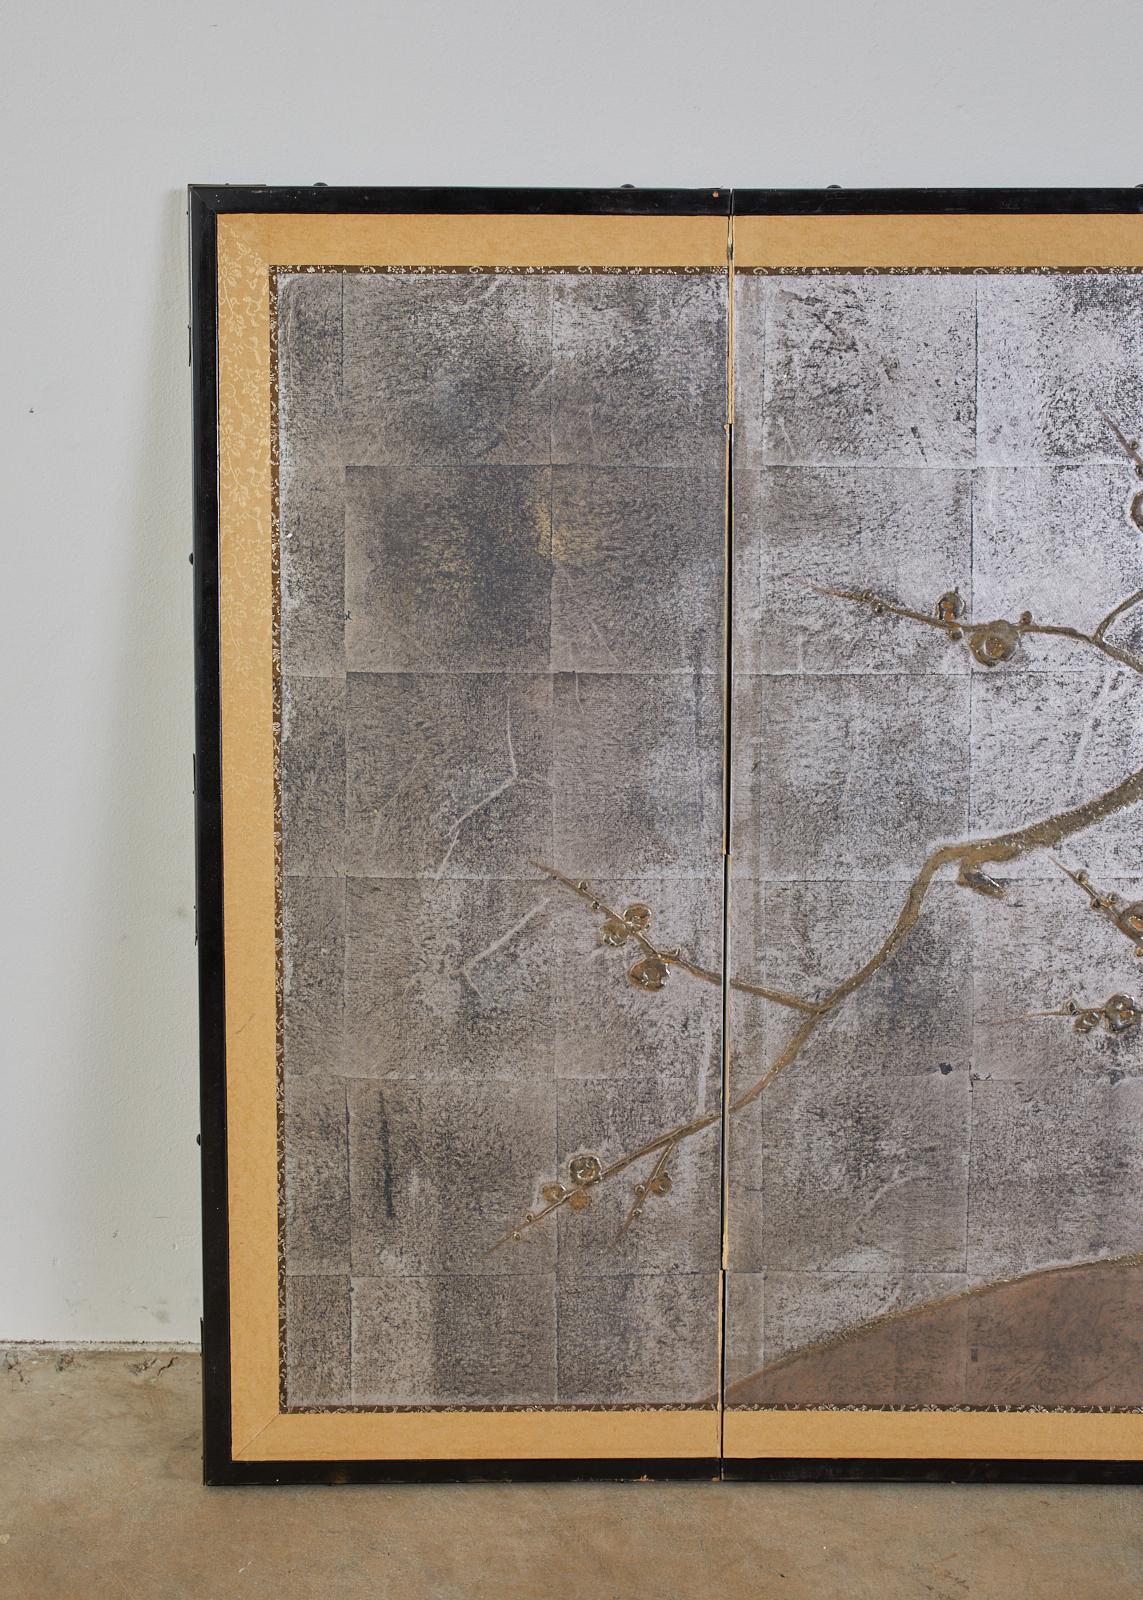 Unique Japanese four-panel folding byobu screen featuring a flowering prunus or plum tree over a dramatic silver leaf ground. The silver has a lovely faded patina that gives a moodiness to the art work which is painted in a moriage or raised pigment